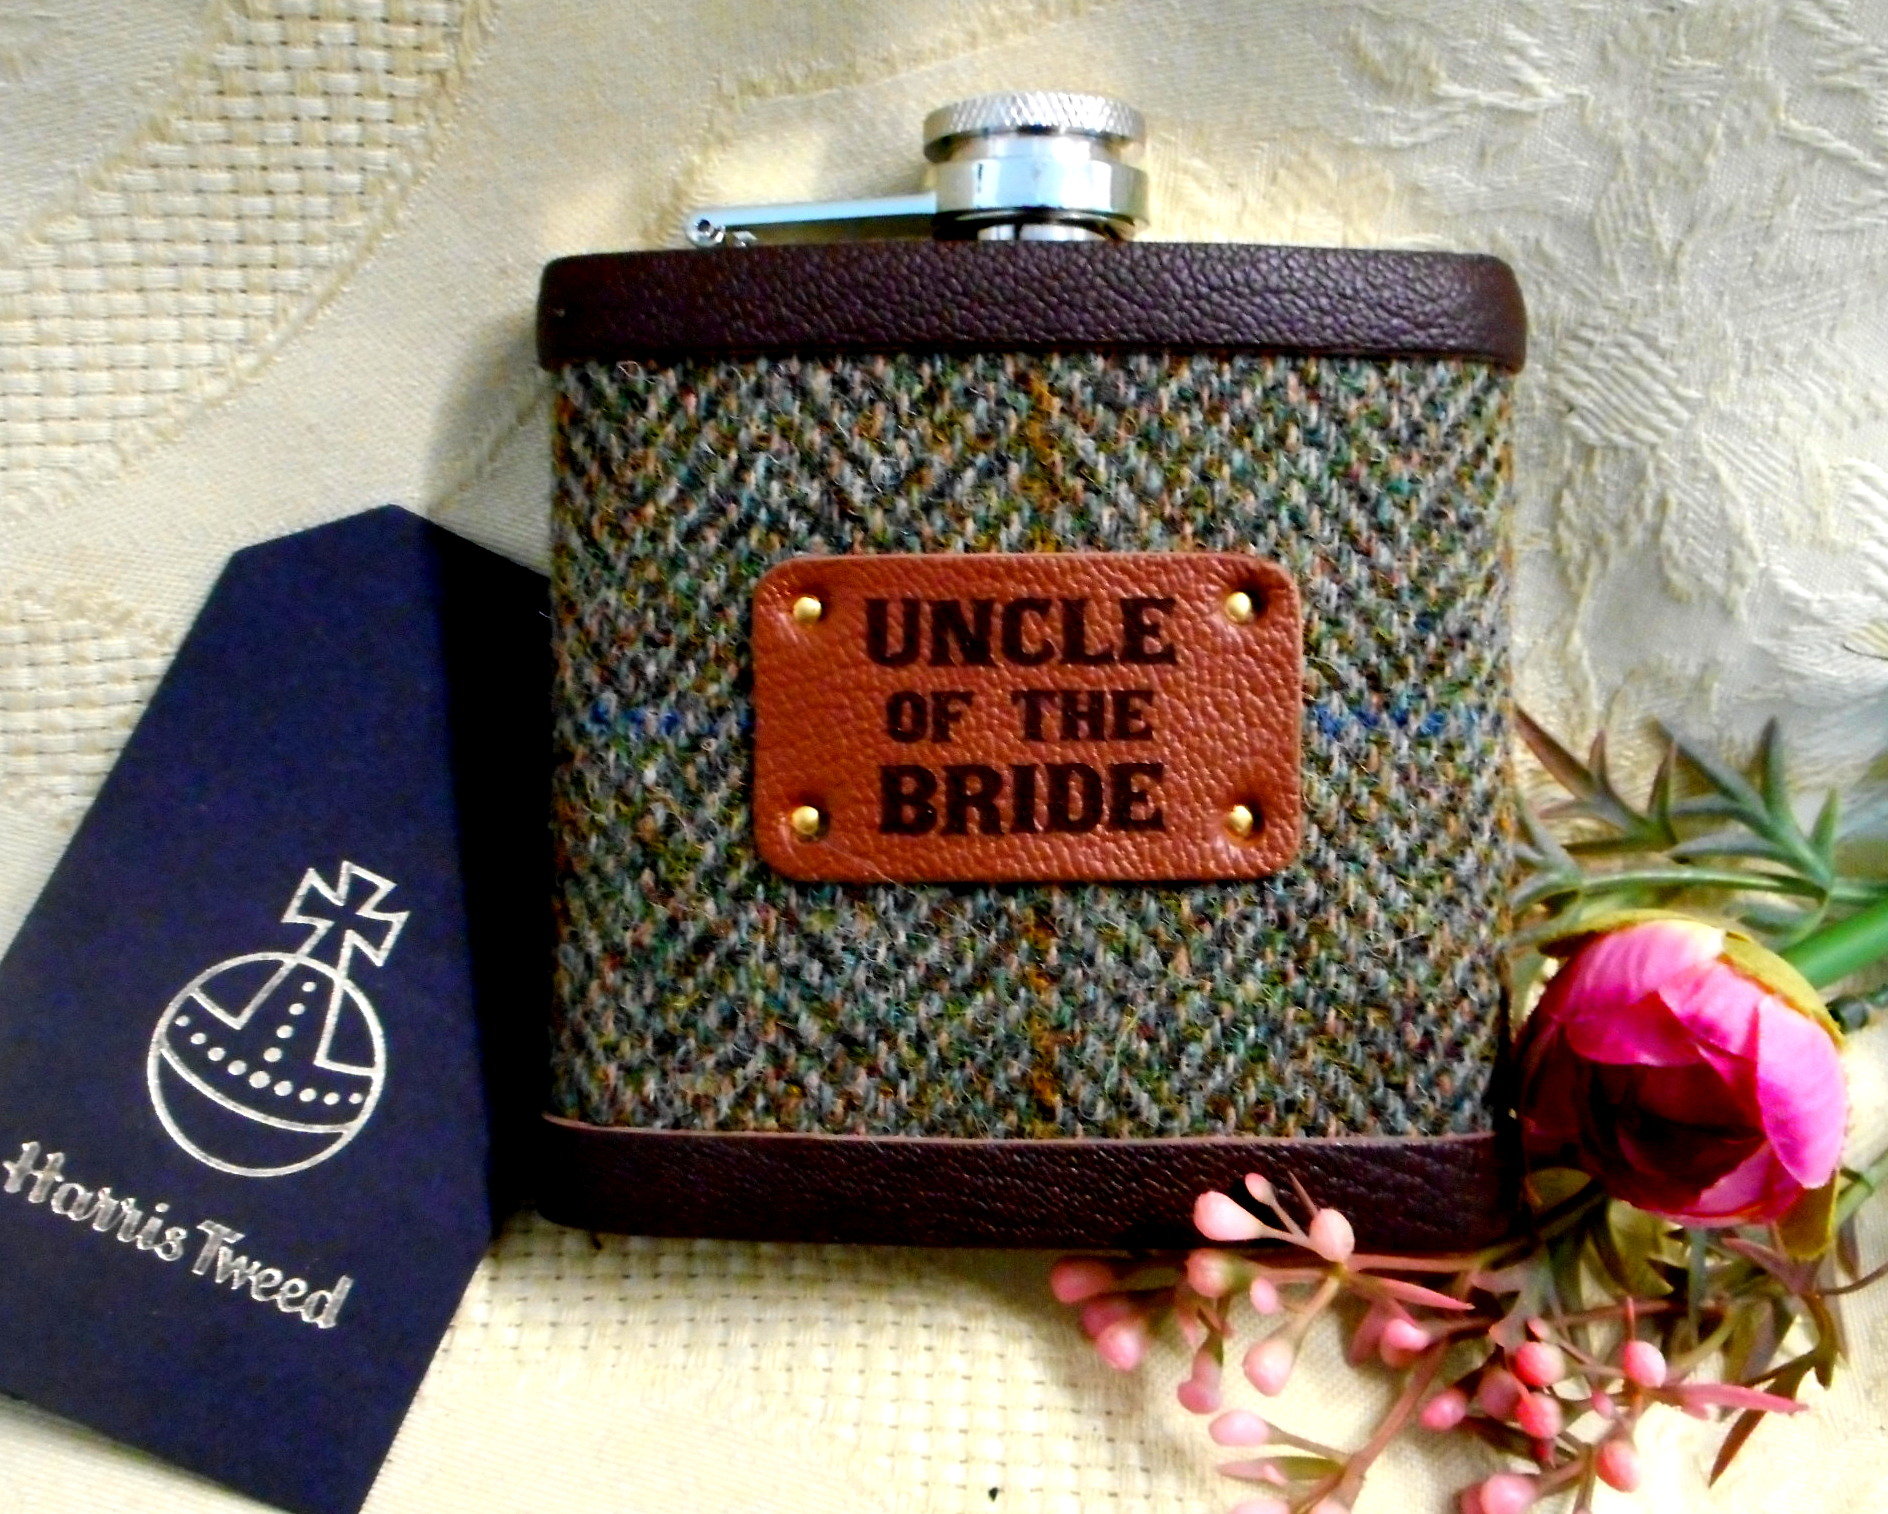 Uncle of the Bride or Groom Harris Tweed hip flask with leather trim, choice of many tweeds, personalized wedding gift